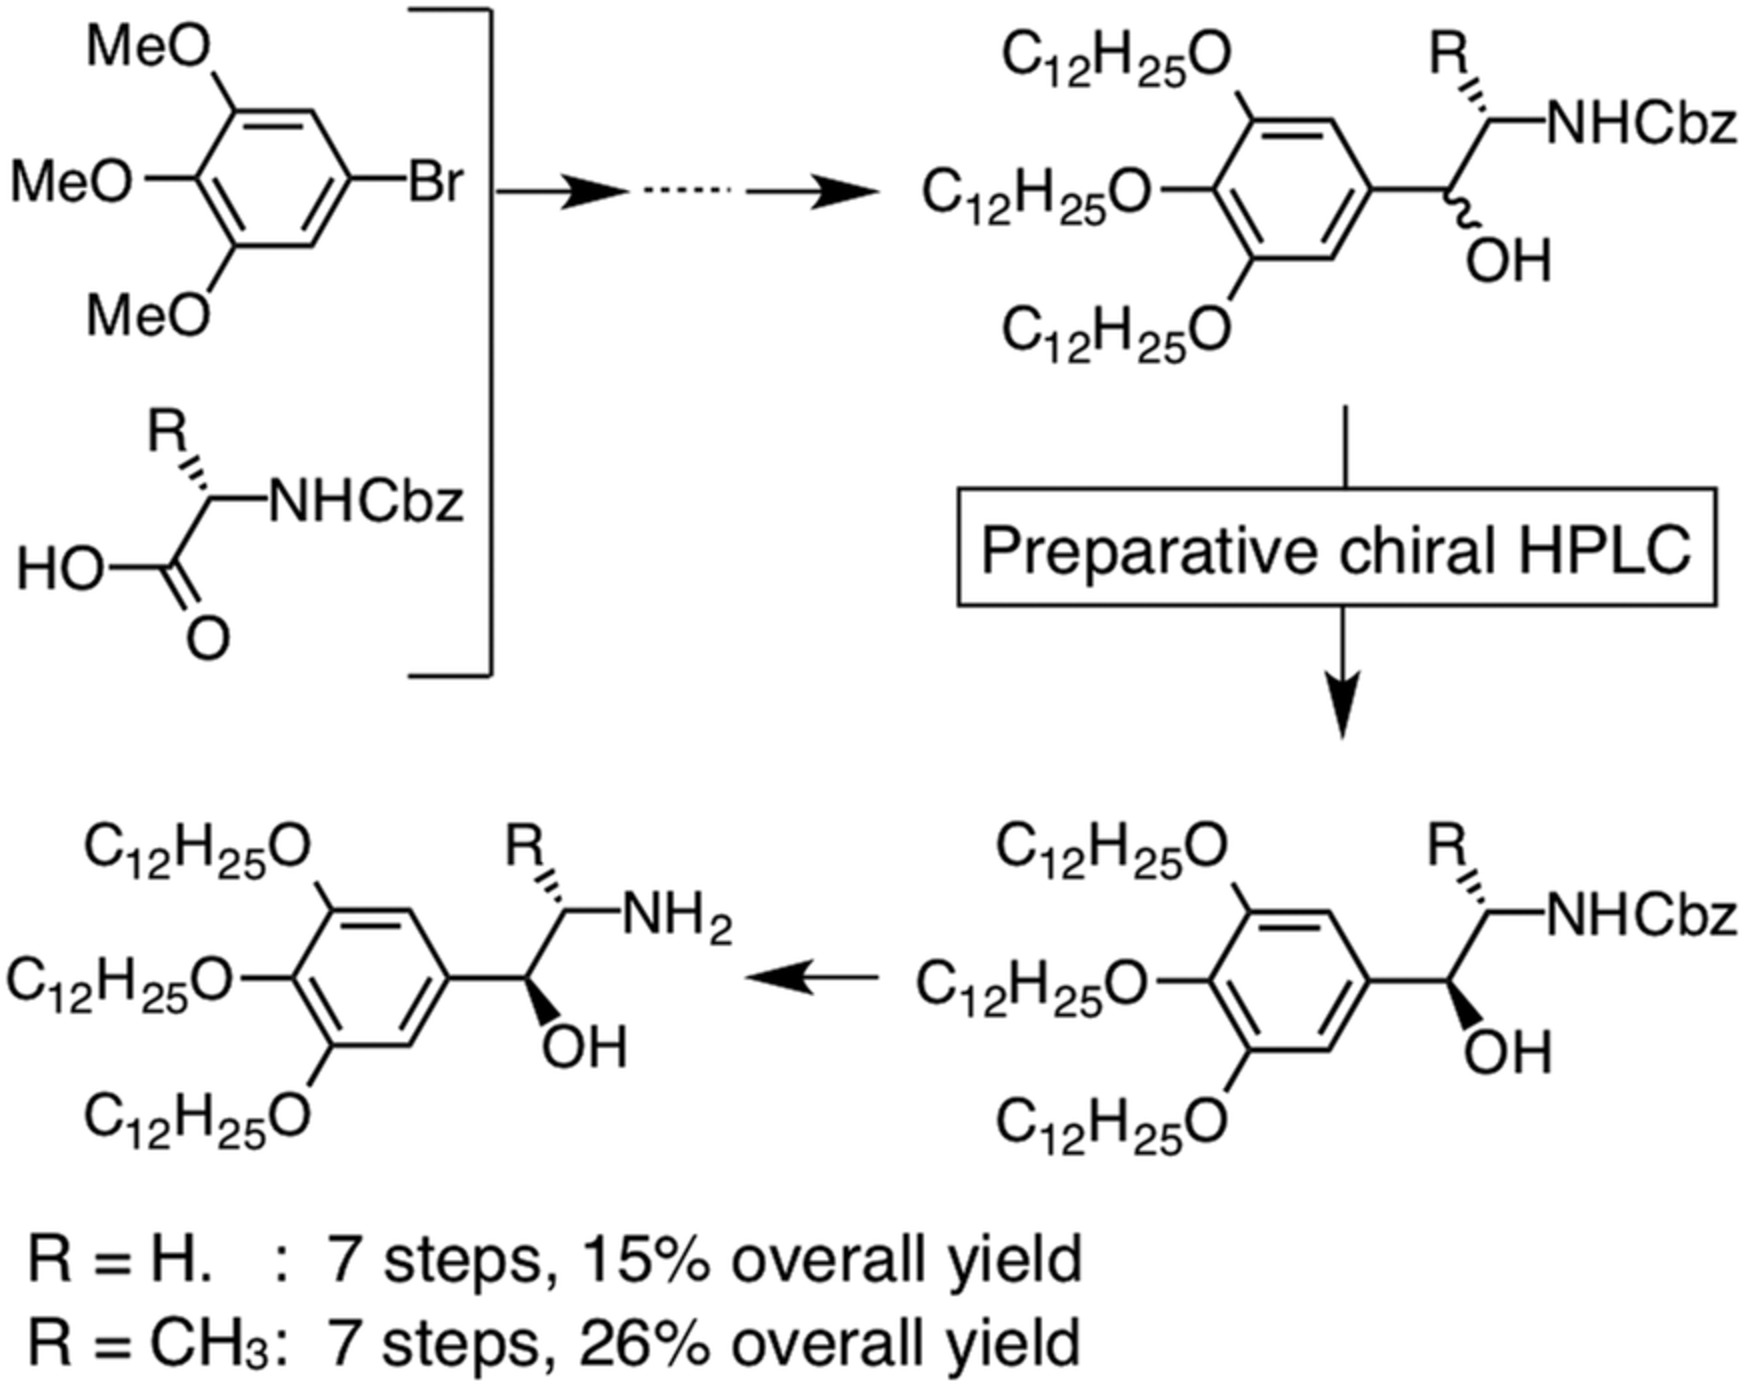 Efficient preparation of stereopure amphiphilic 1,2‐amino alcohols by using preparative enantioselective HPLC